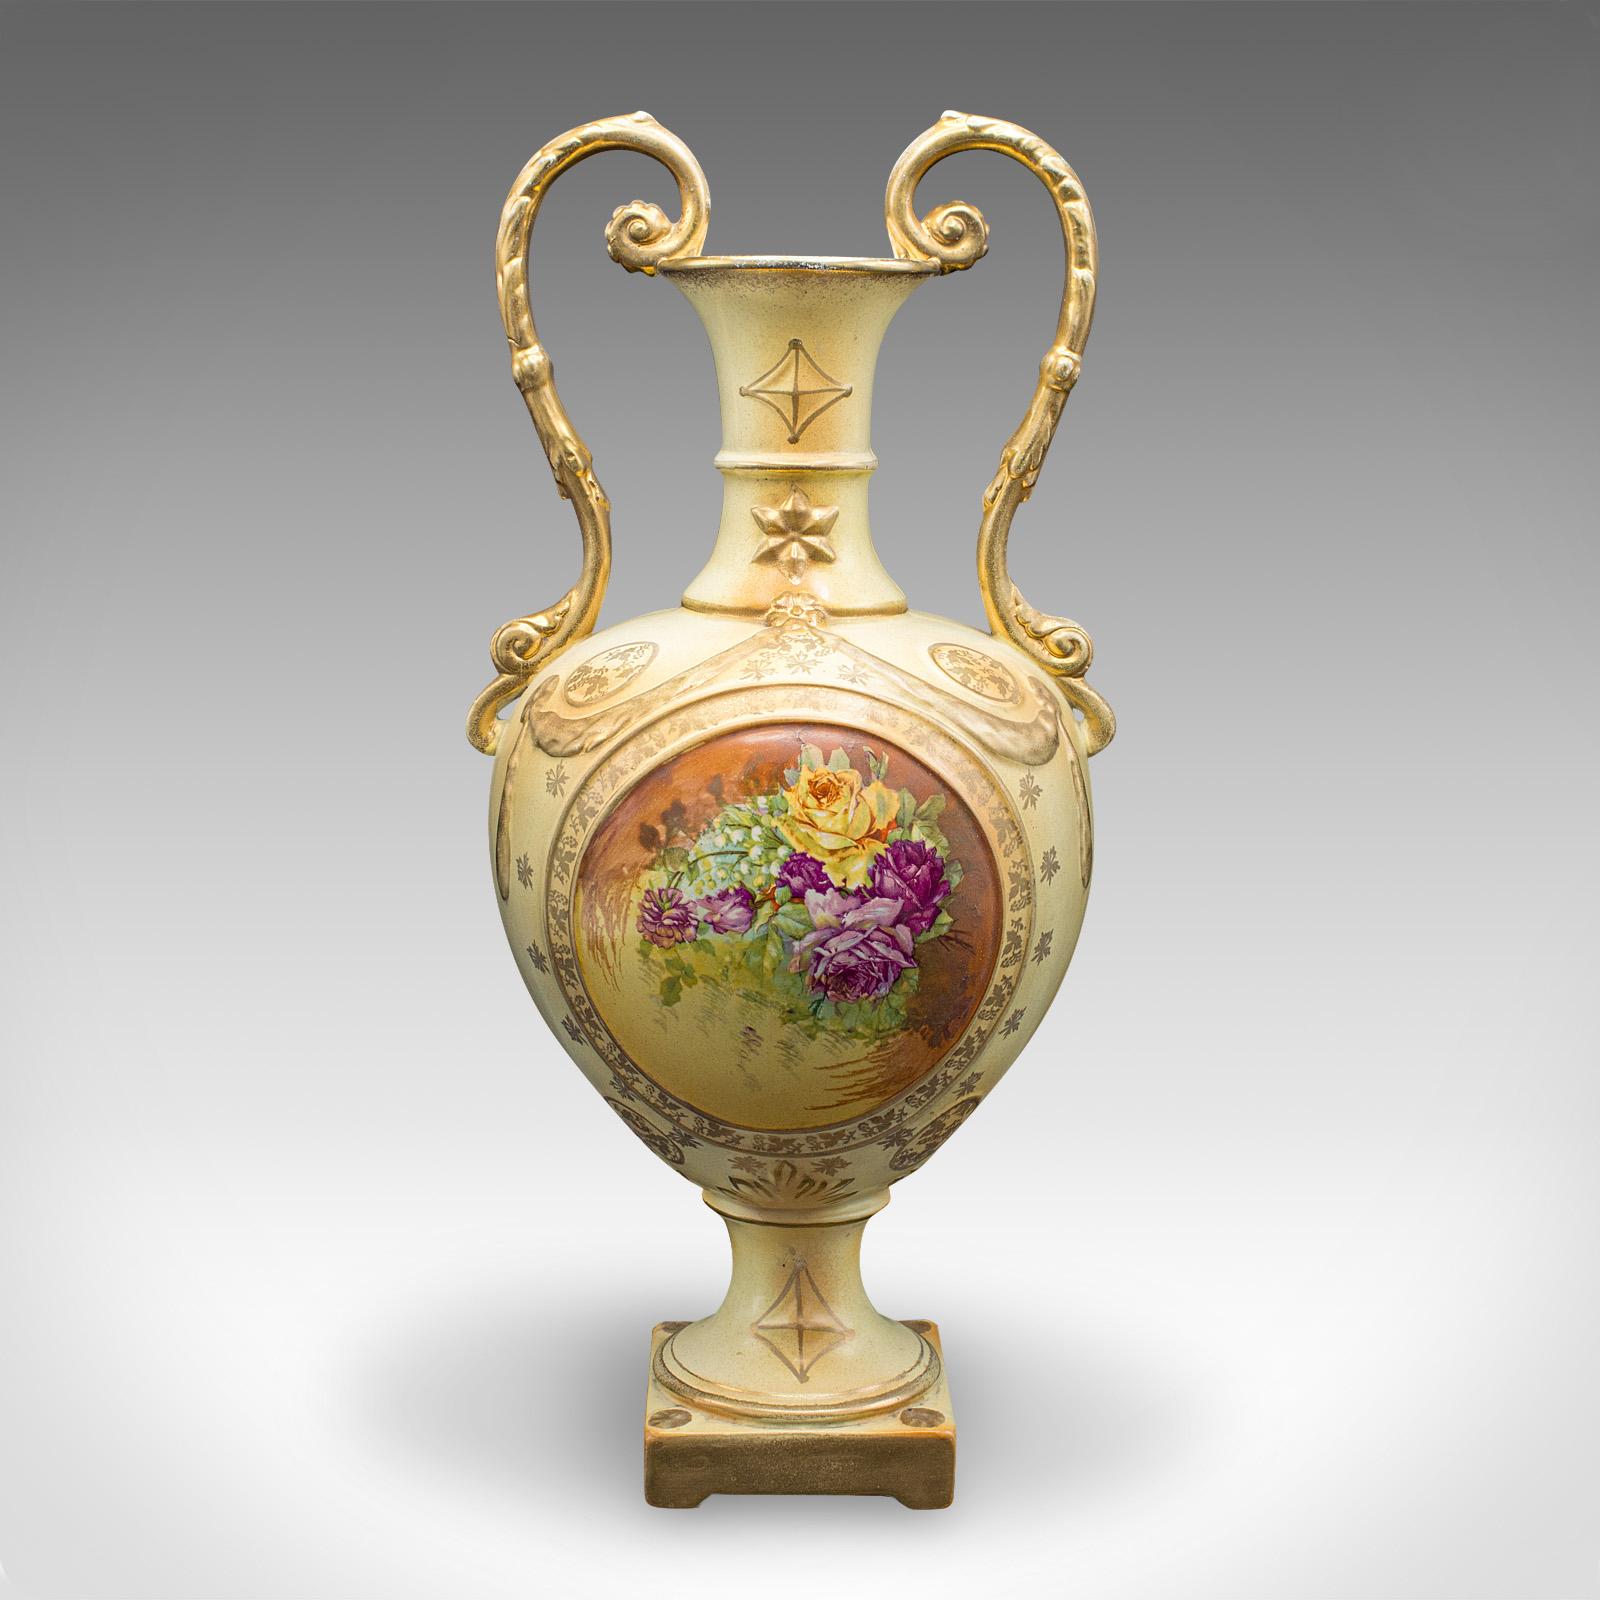 This is an antique flower vase. An English, ceramic baluster urn with Continental decor, dating to the early 20th century, circa 1920.

Attractive display vase with wonderful foliate decor
Displays a desirable aged patina and in good order
Ceramic